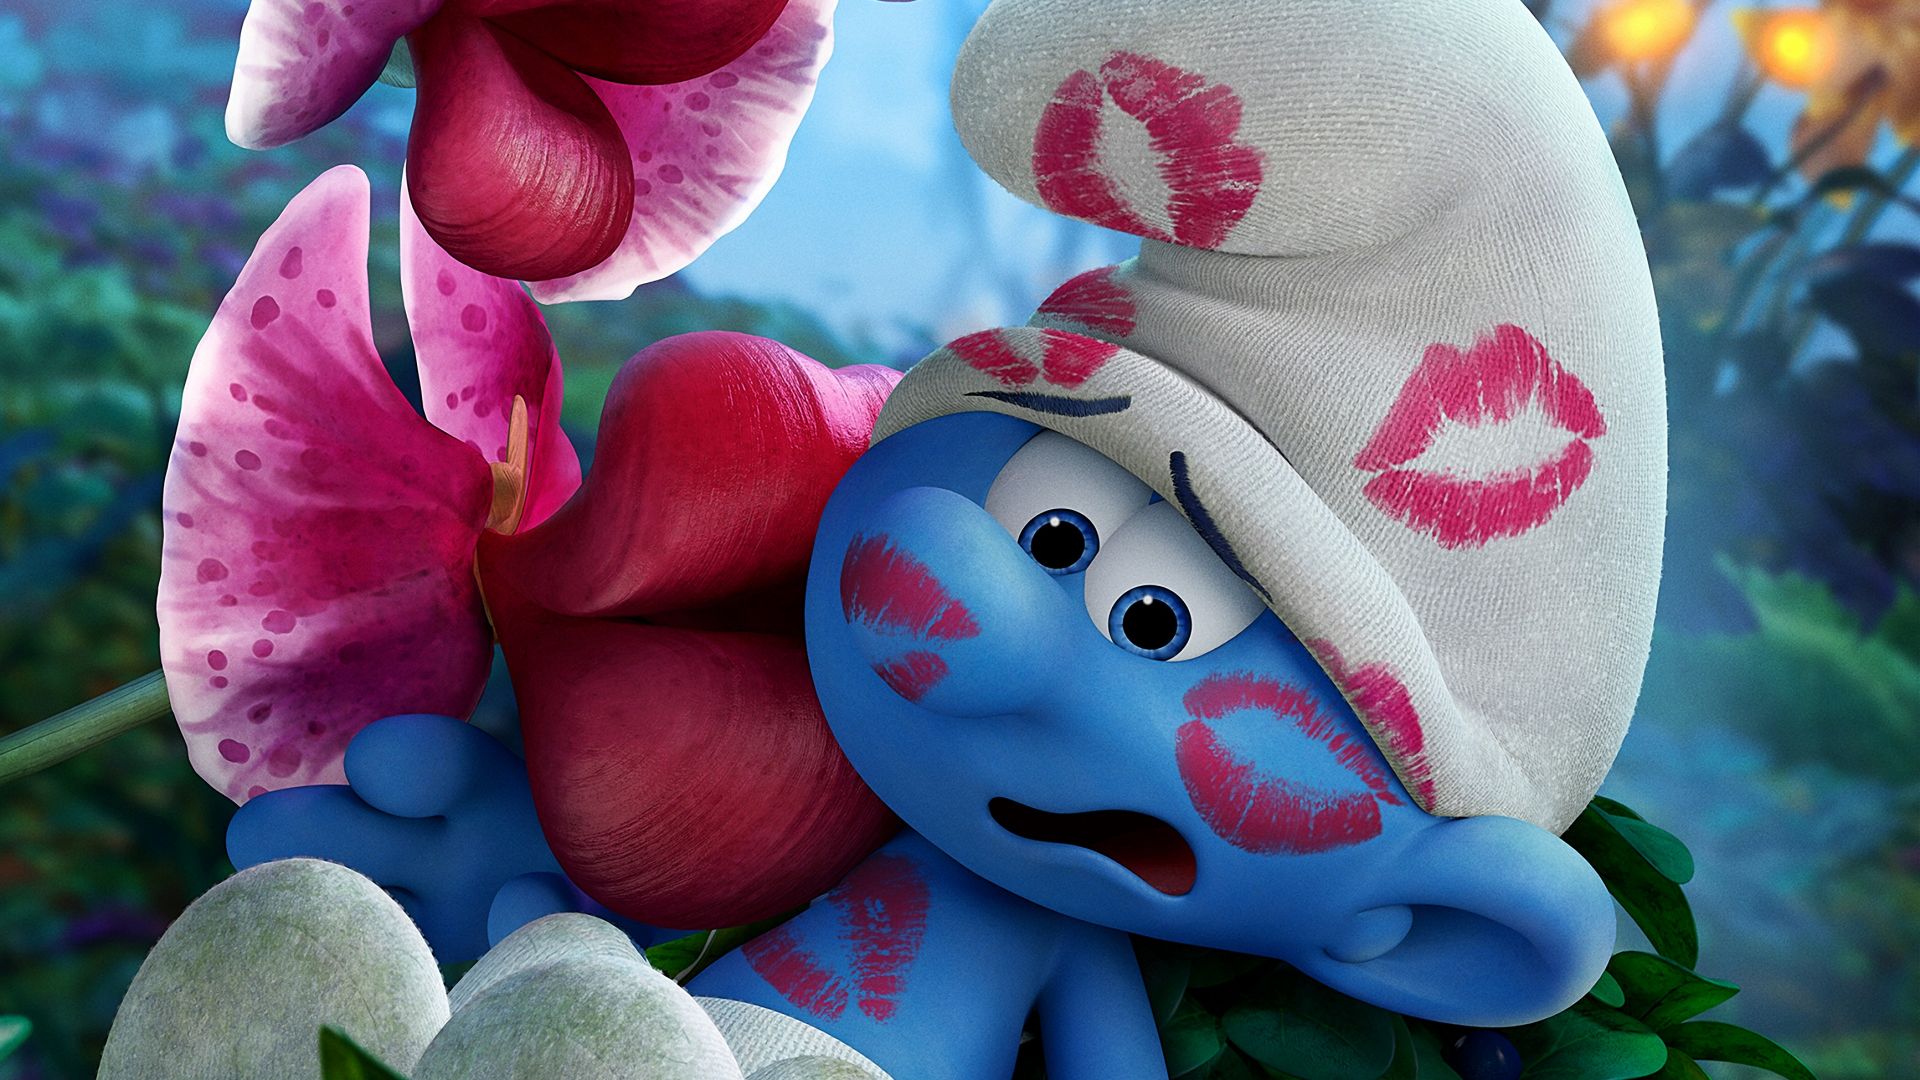 Smurfs: The Lost Village, Clumsy, best animation movies (horizontal)